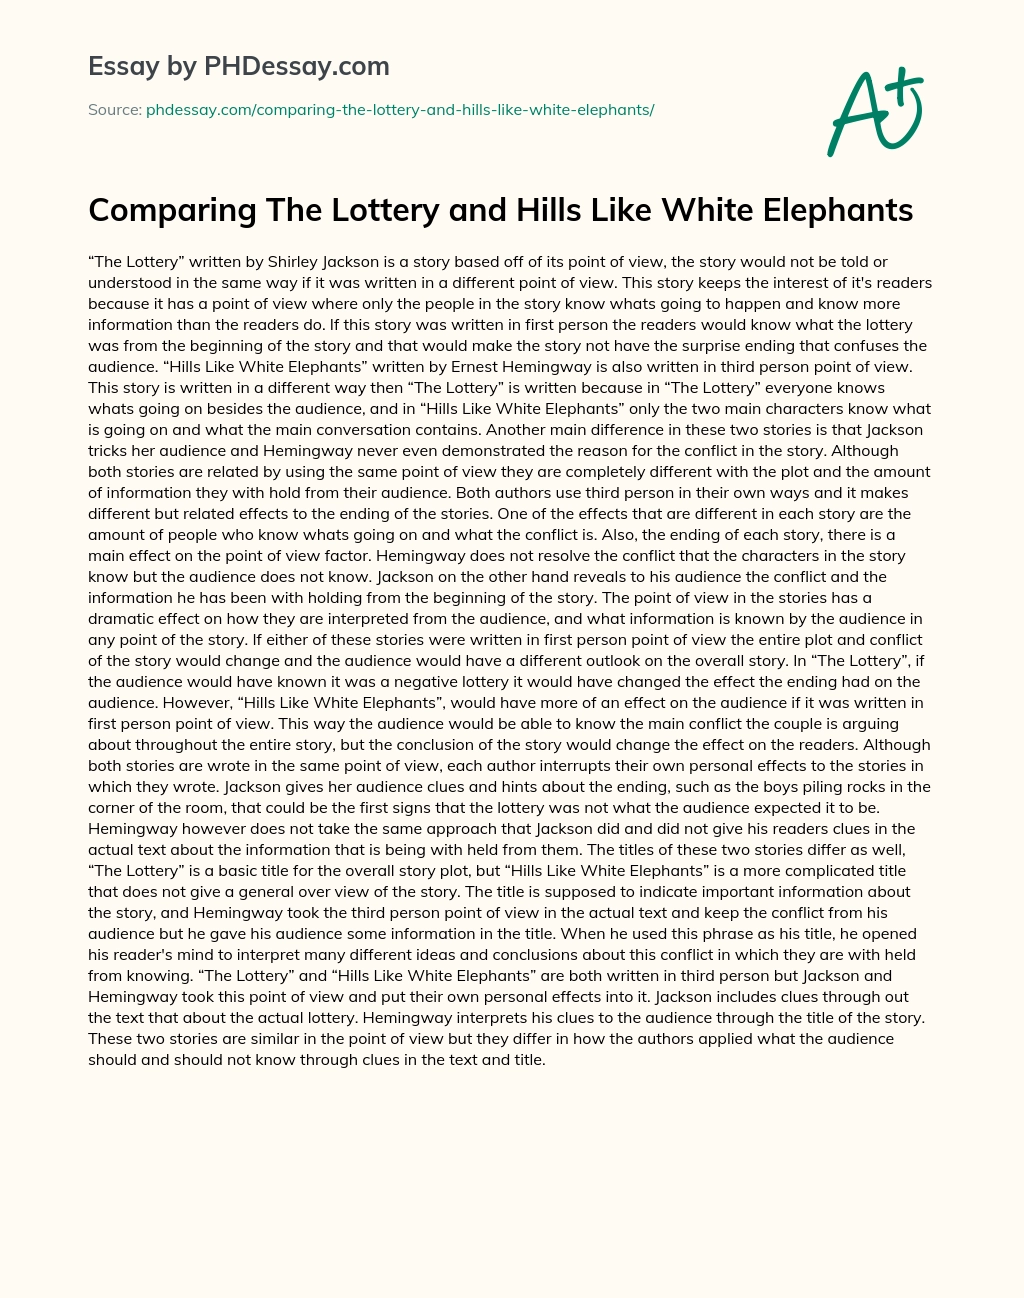 Comparing The Lottery and Hills Like White Elephants essay